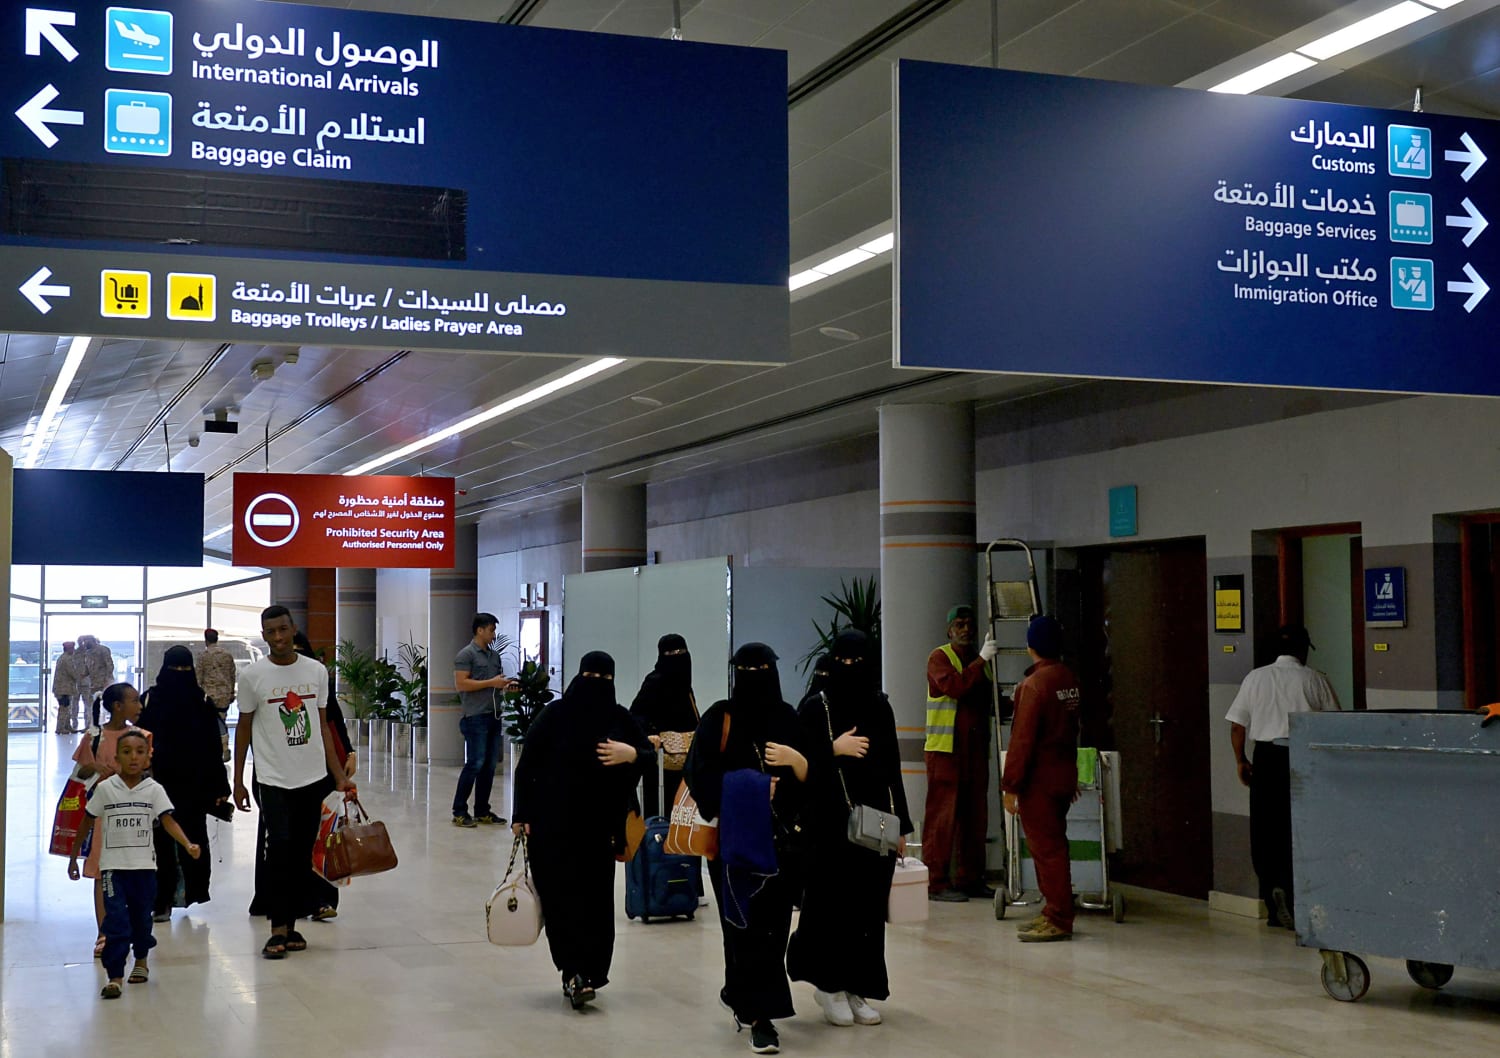 Saudi Arabia law change allows women to travel without male consent